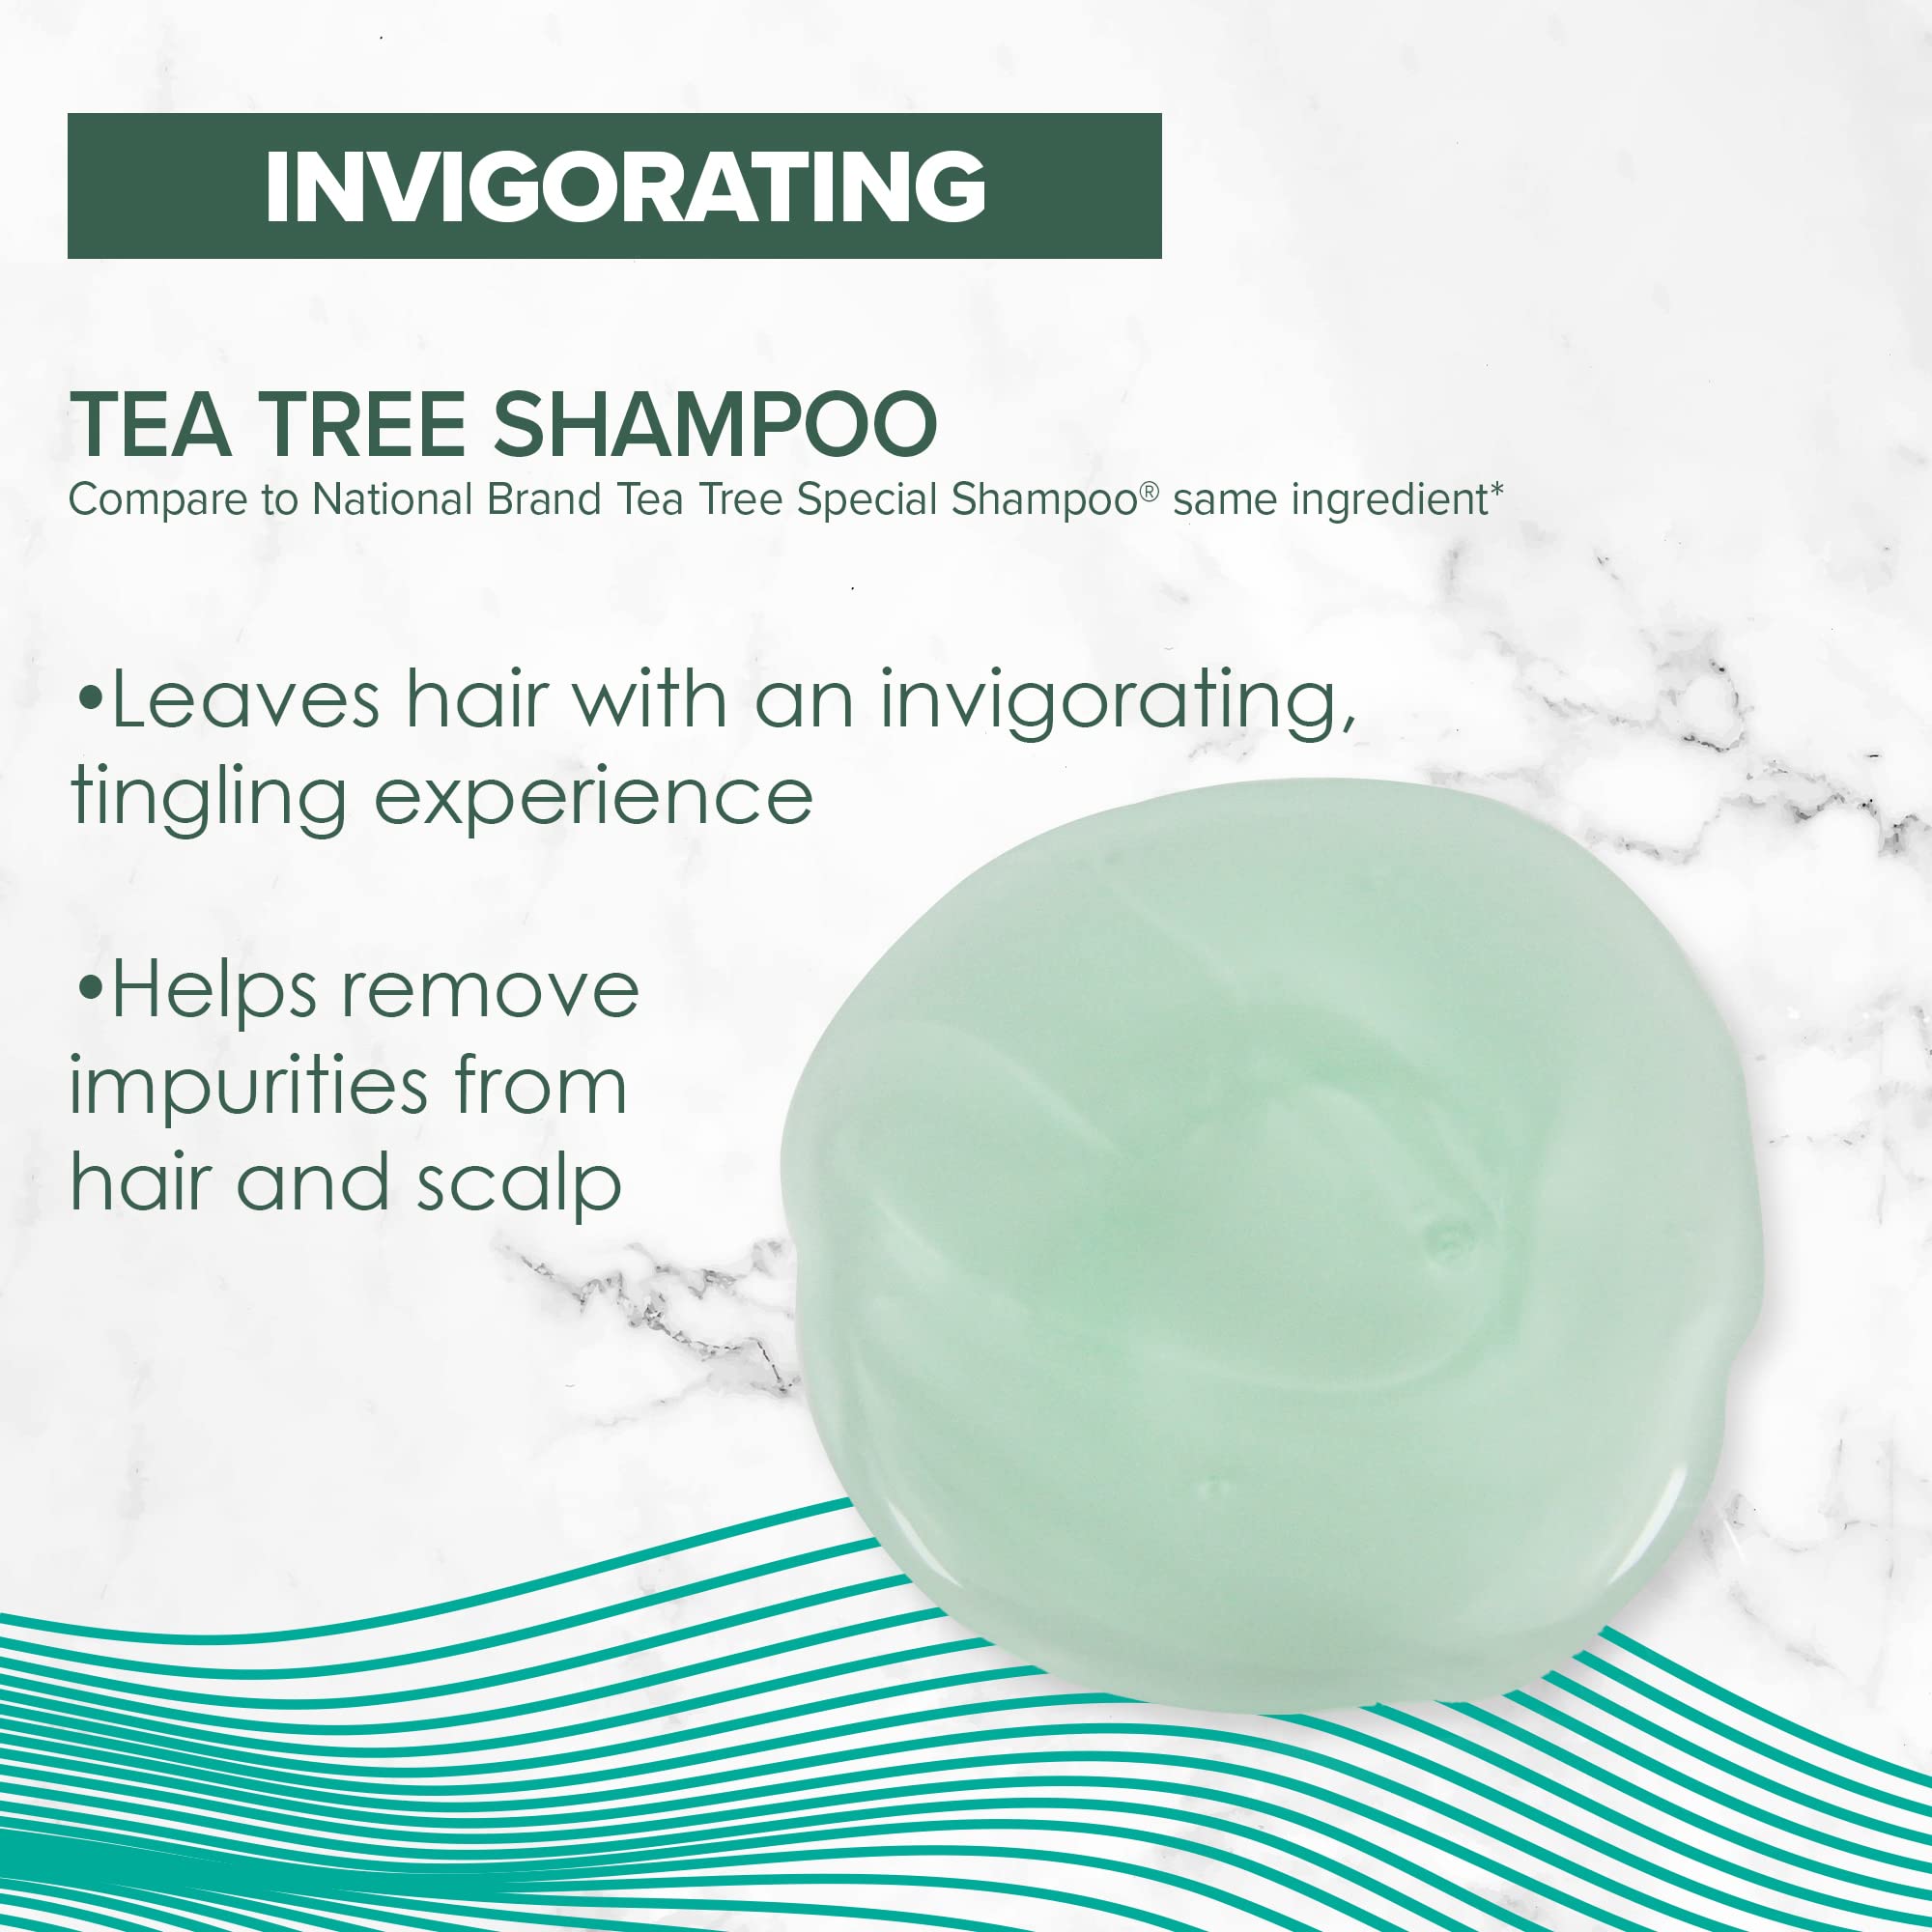 True+Real Tea Tree Shampoo, Invigorating Deep Clean Scalp Care, Refreshing Mint Scent, For All Hair Types, 10.14 oz